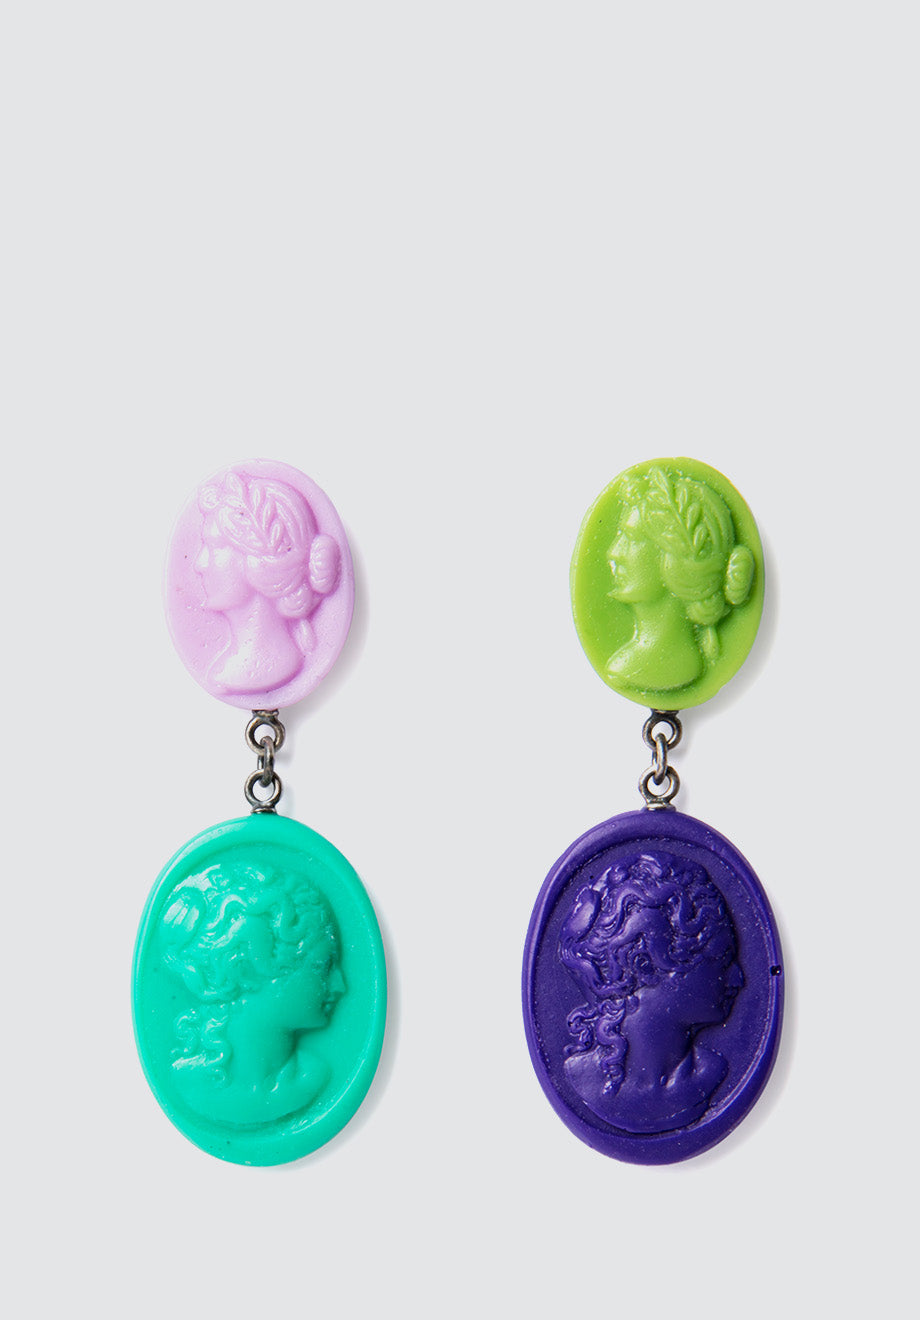 Contemporary Mismatched Cameo Earrings | Medium